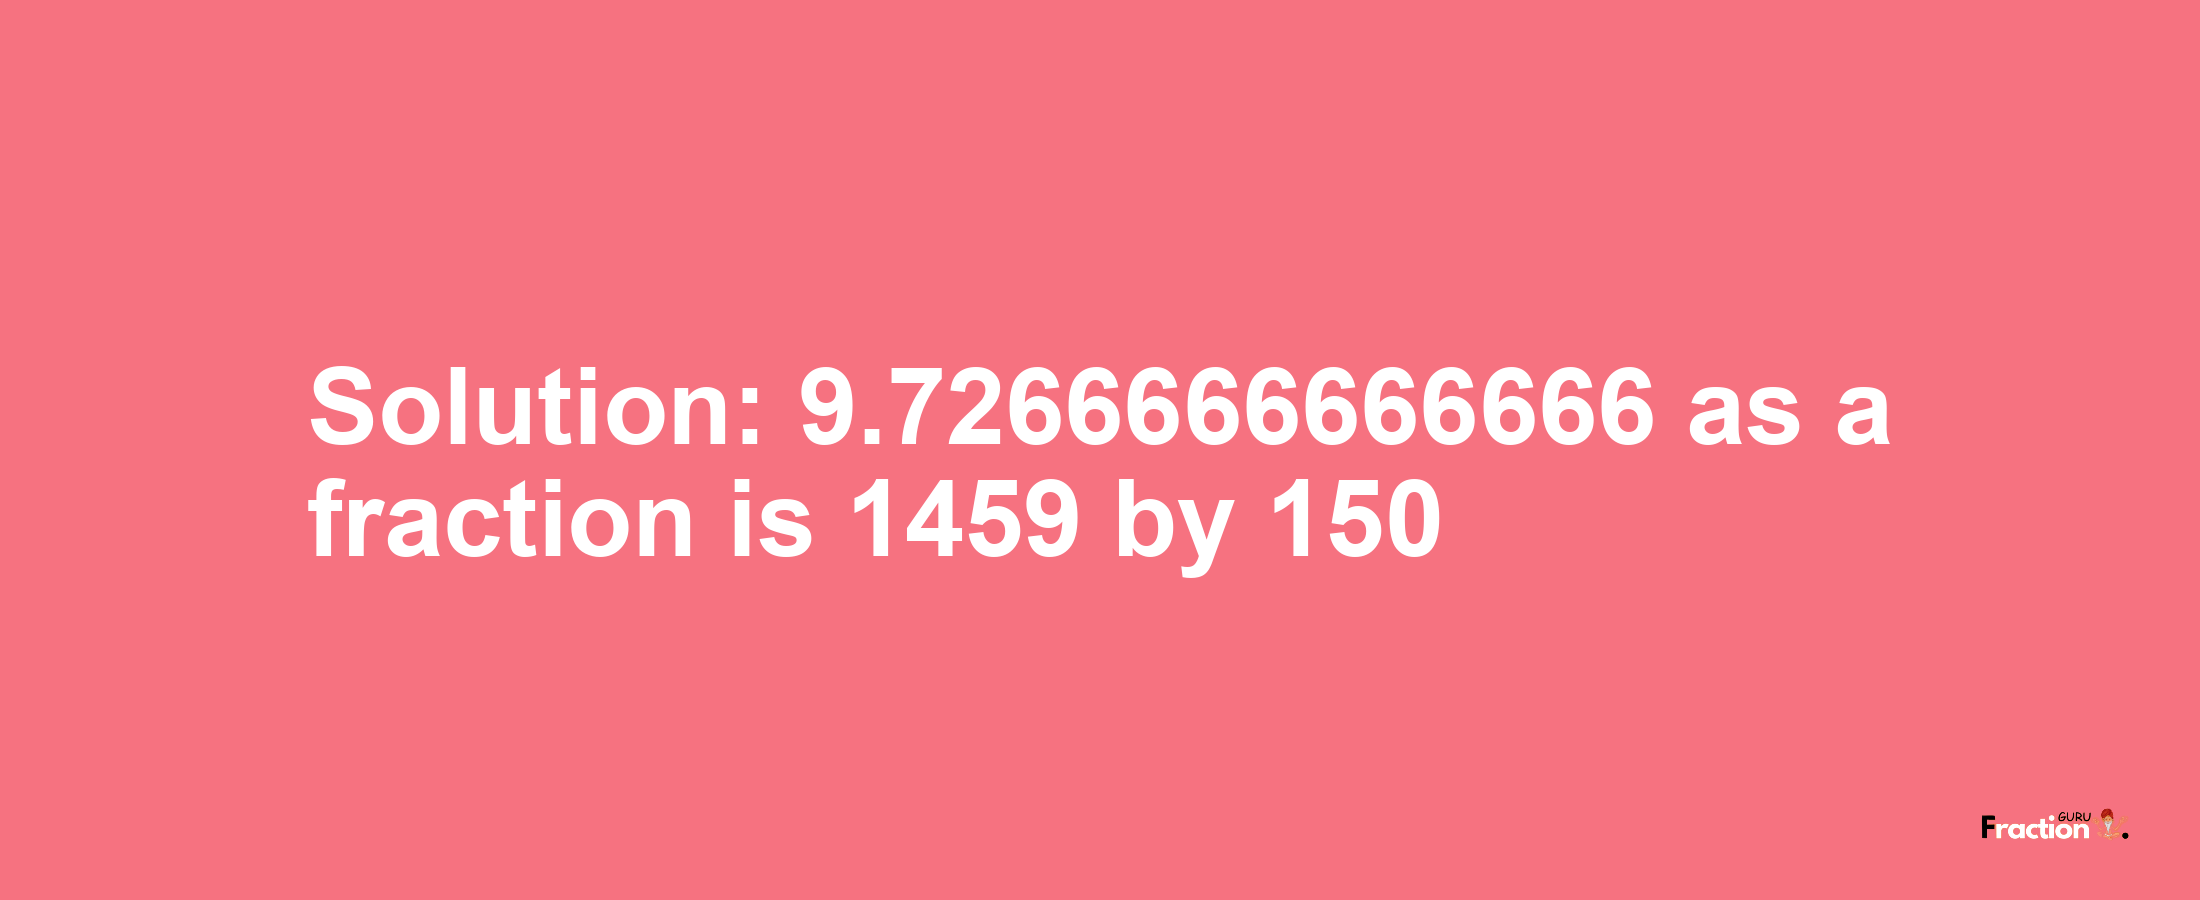 Solution:9.7266666666666 as a fraction is 1459/150